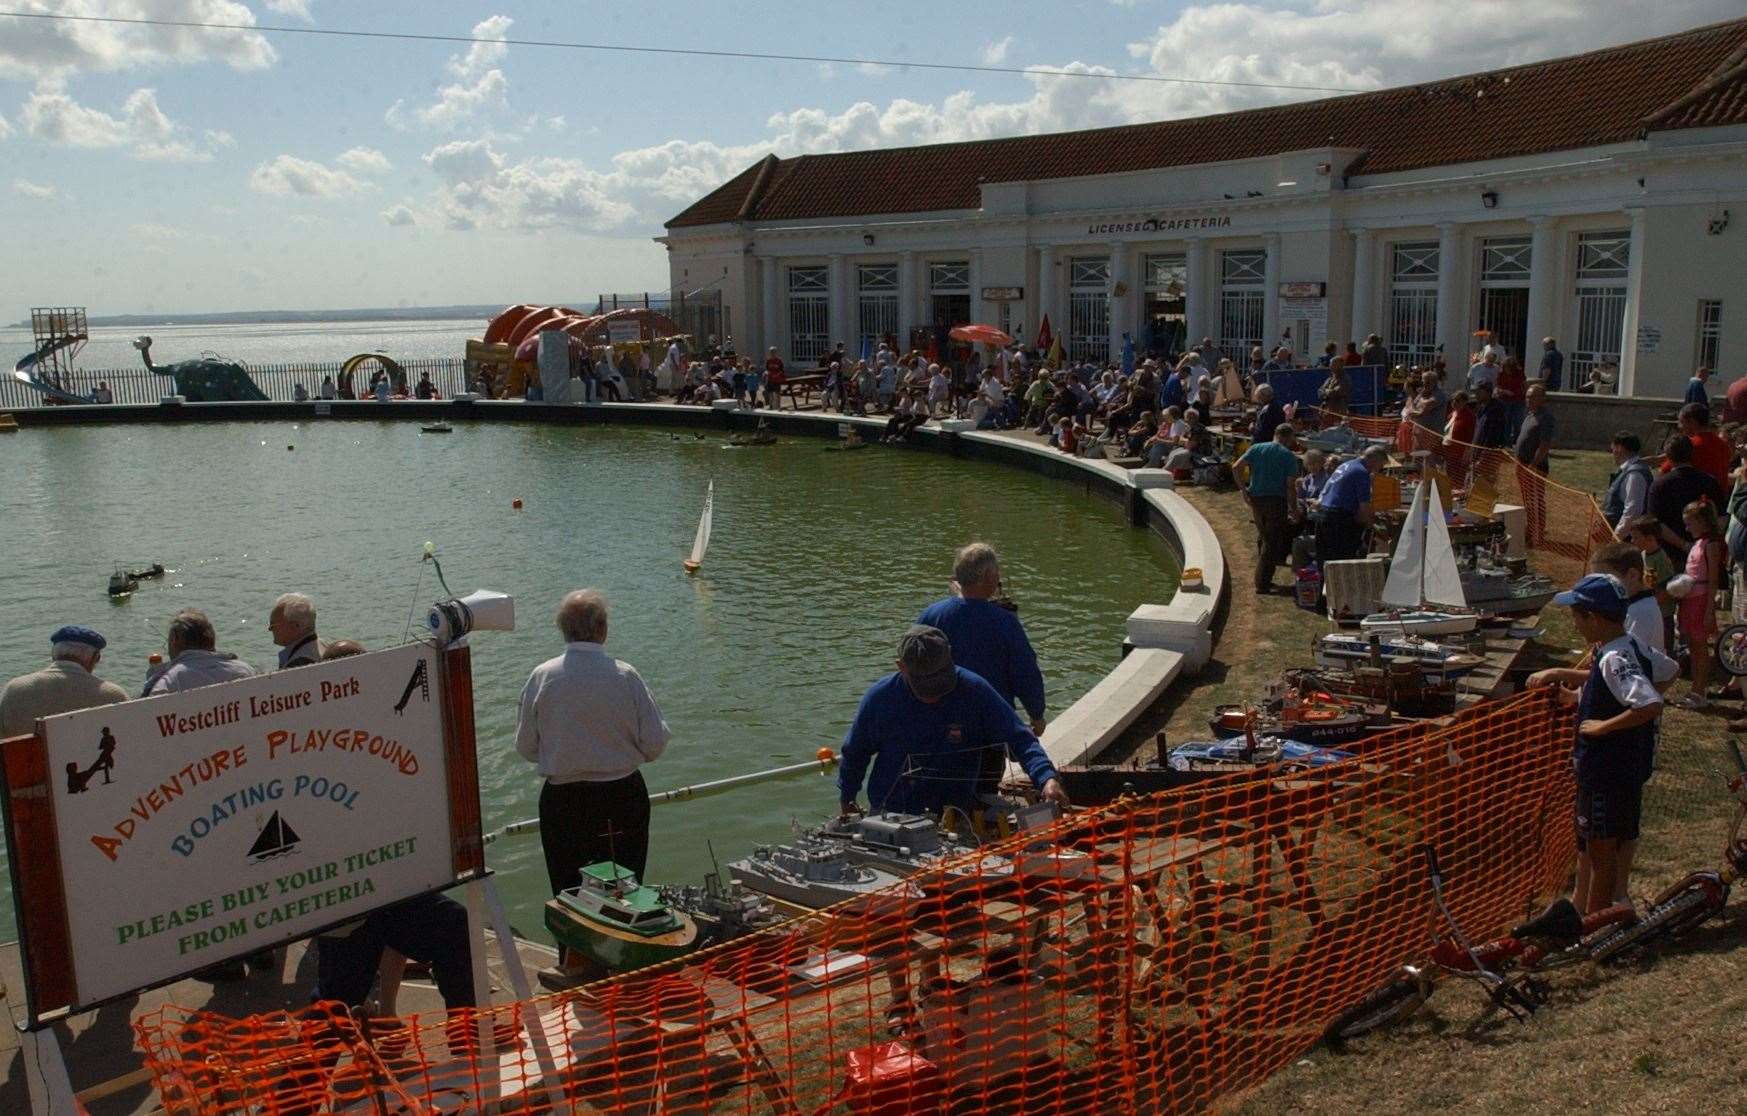 Model ship shows are held at the boating pool in Ramsgate